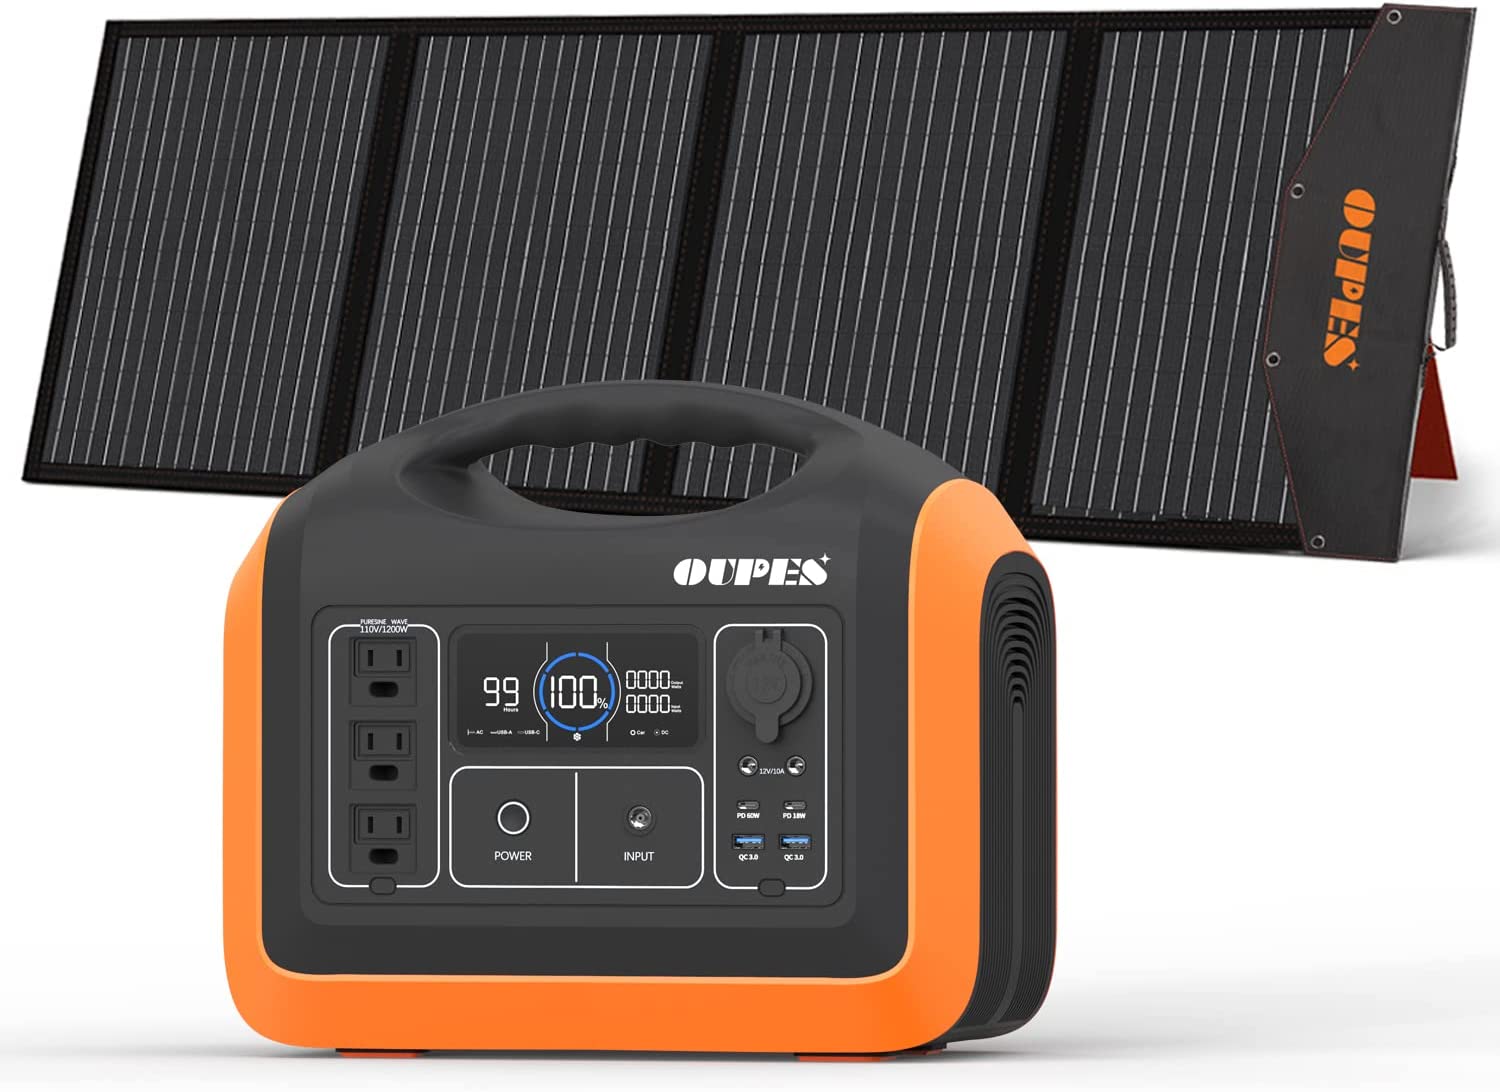 OUPES 1200W Portable Power Station w/ 240W Foldable Solar Panel Included, Solar Generator Explorer 110V/1200W(Peak 3600W) AC Outlets, LiFePO4 Battery Power Pack Home Backup for Outdoor RV Van Camping Emergency